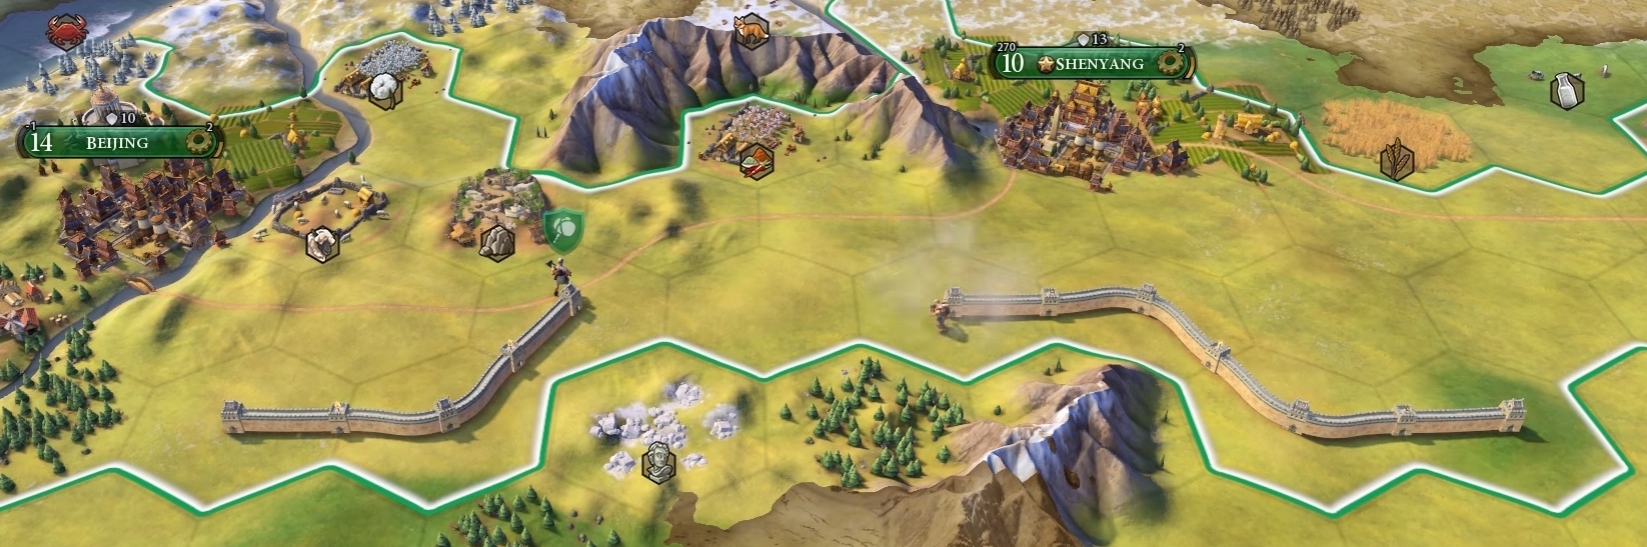 Image - Builders building The Great Wall (Civ6).jpg | Civilization Wiki